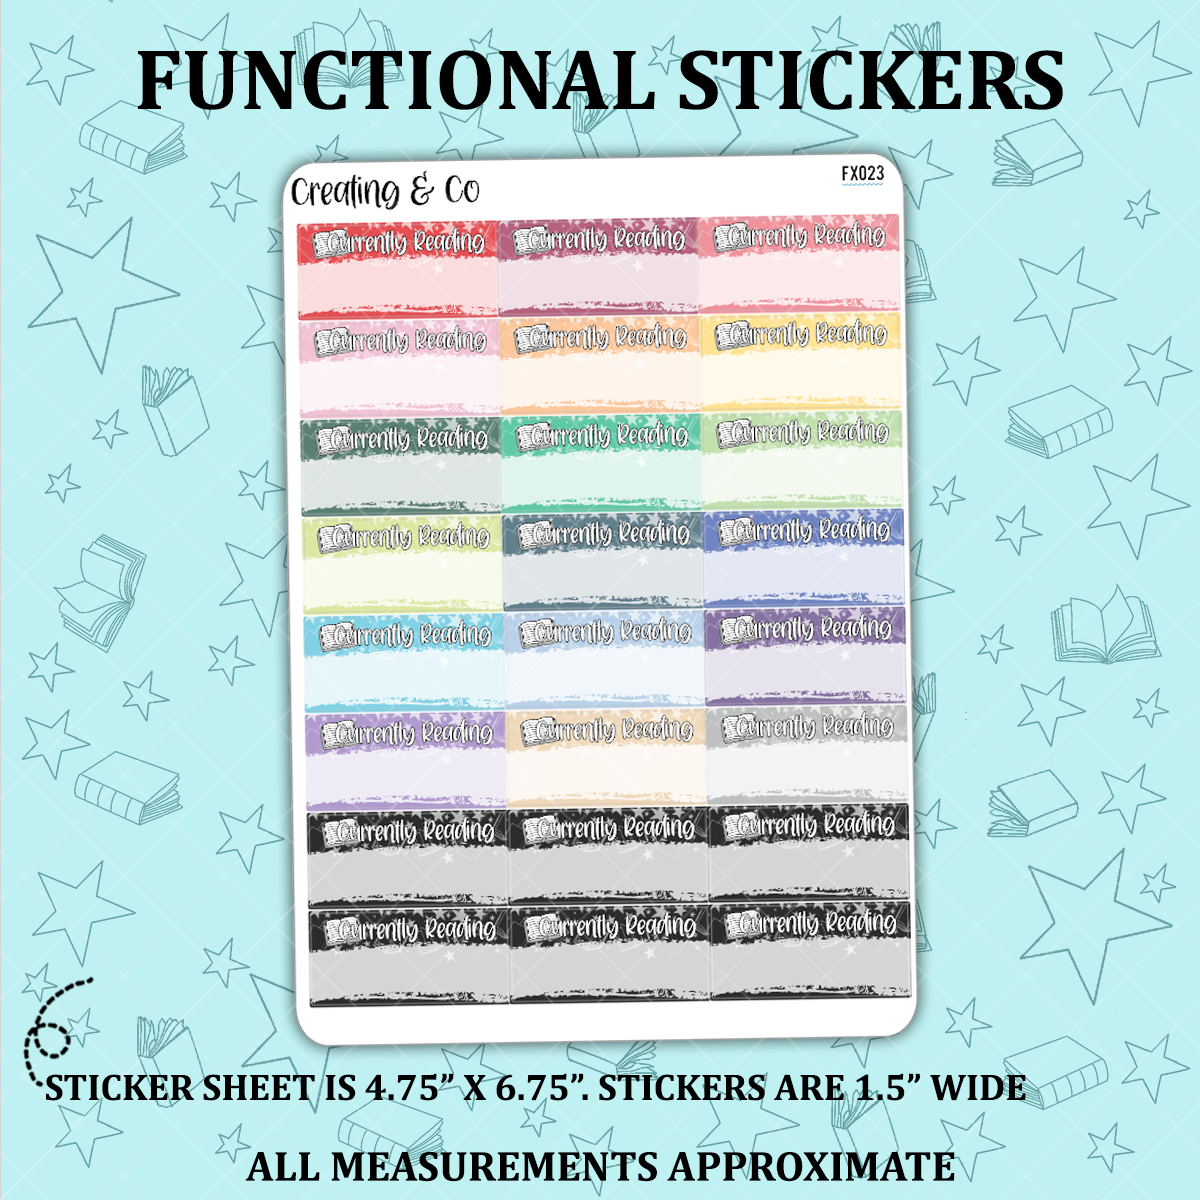 Currently Reading Functional Sticker Sheet - FX023